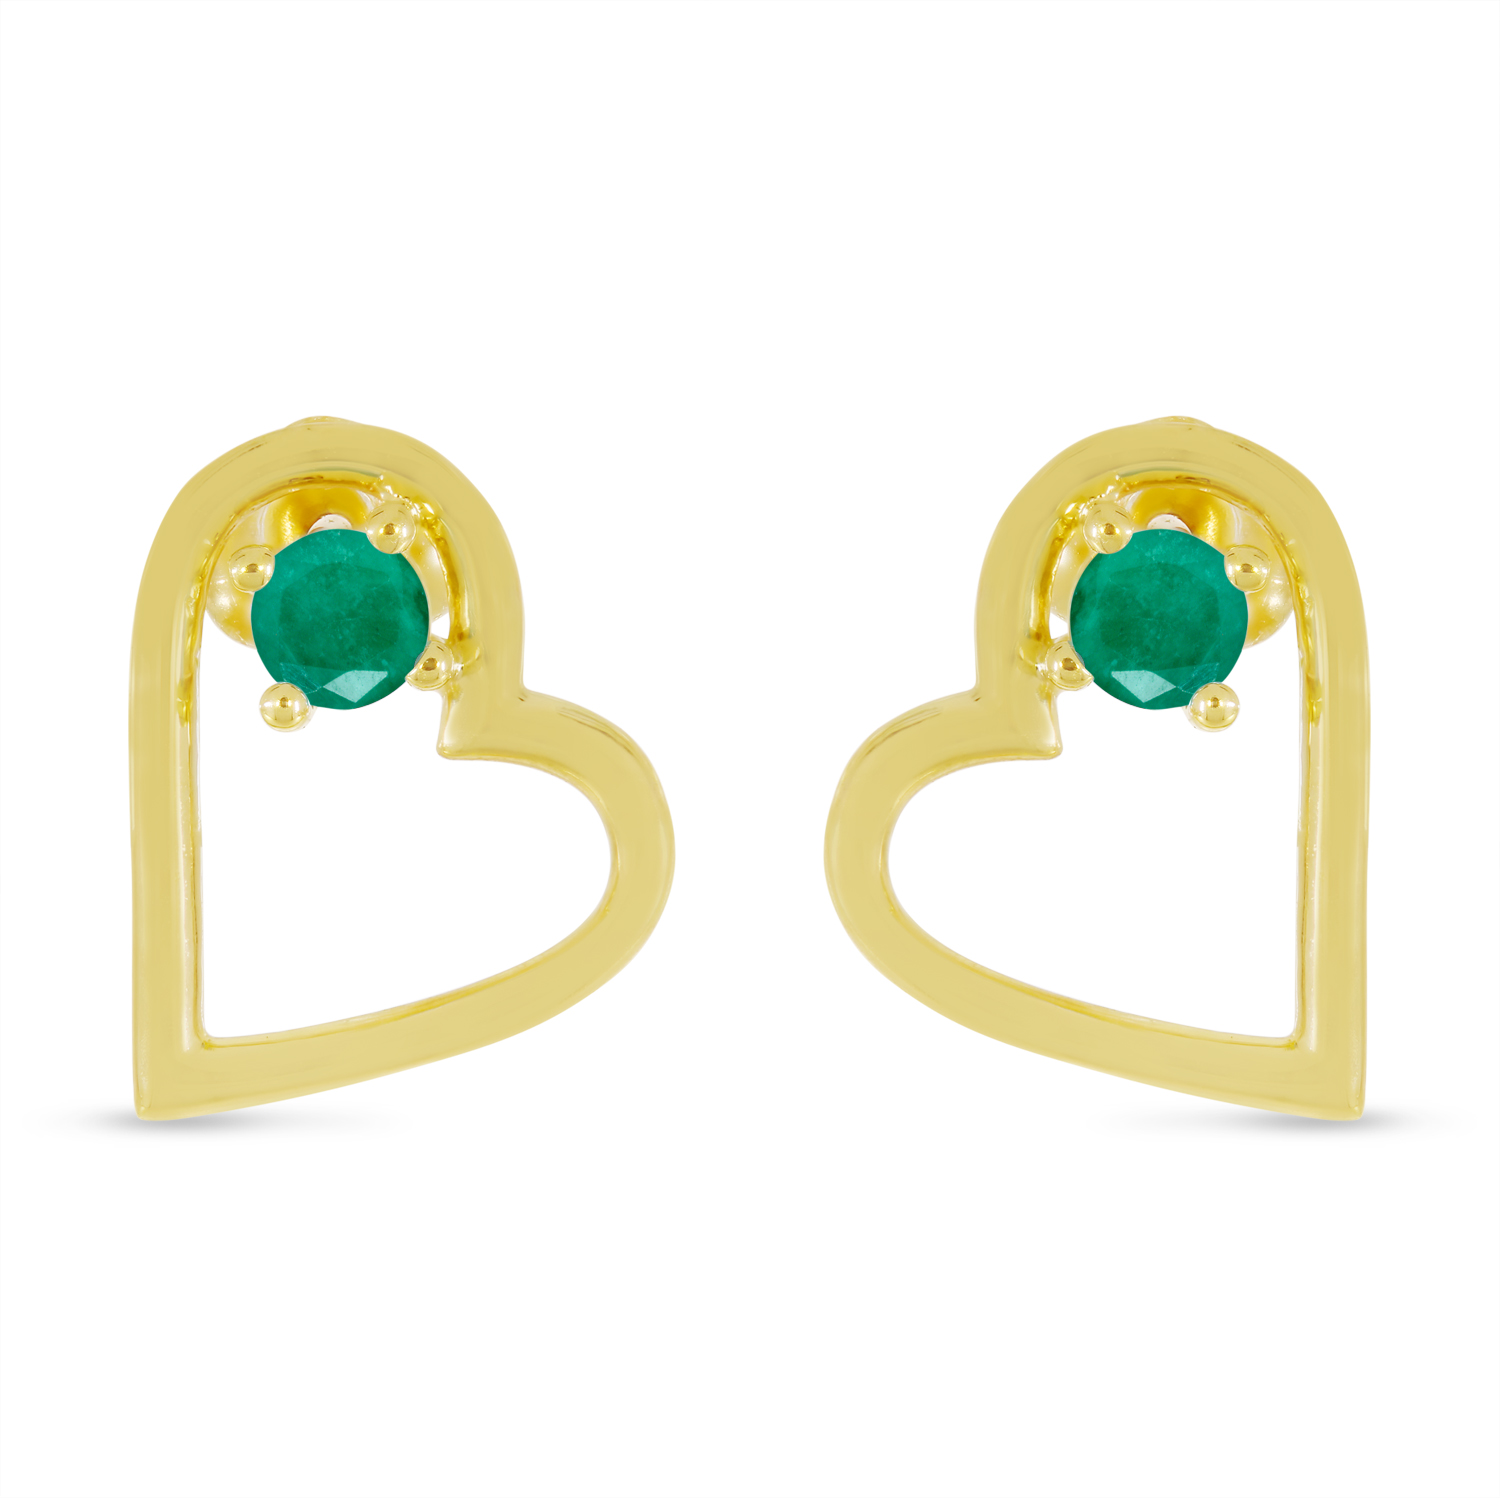 SPARKLD 9ct Yellow Gold Diamond and Emerald Heart Drop Earrings - Sparkld  from Personal Jewellery Service UK